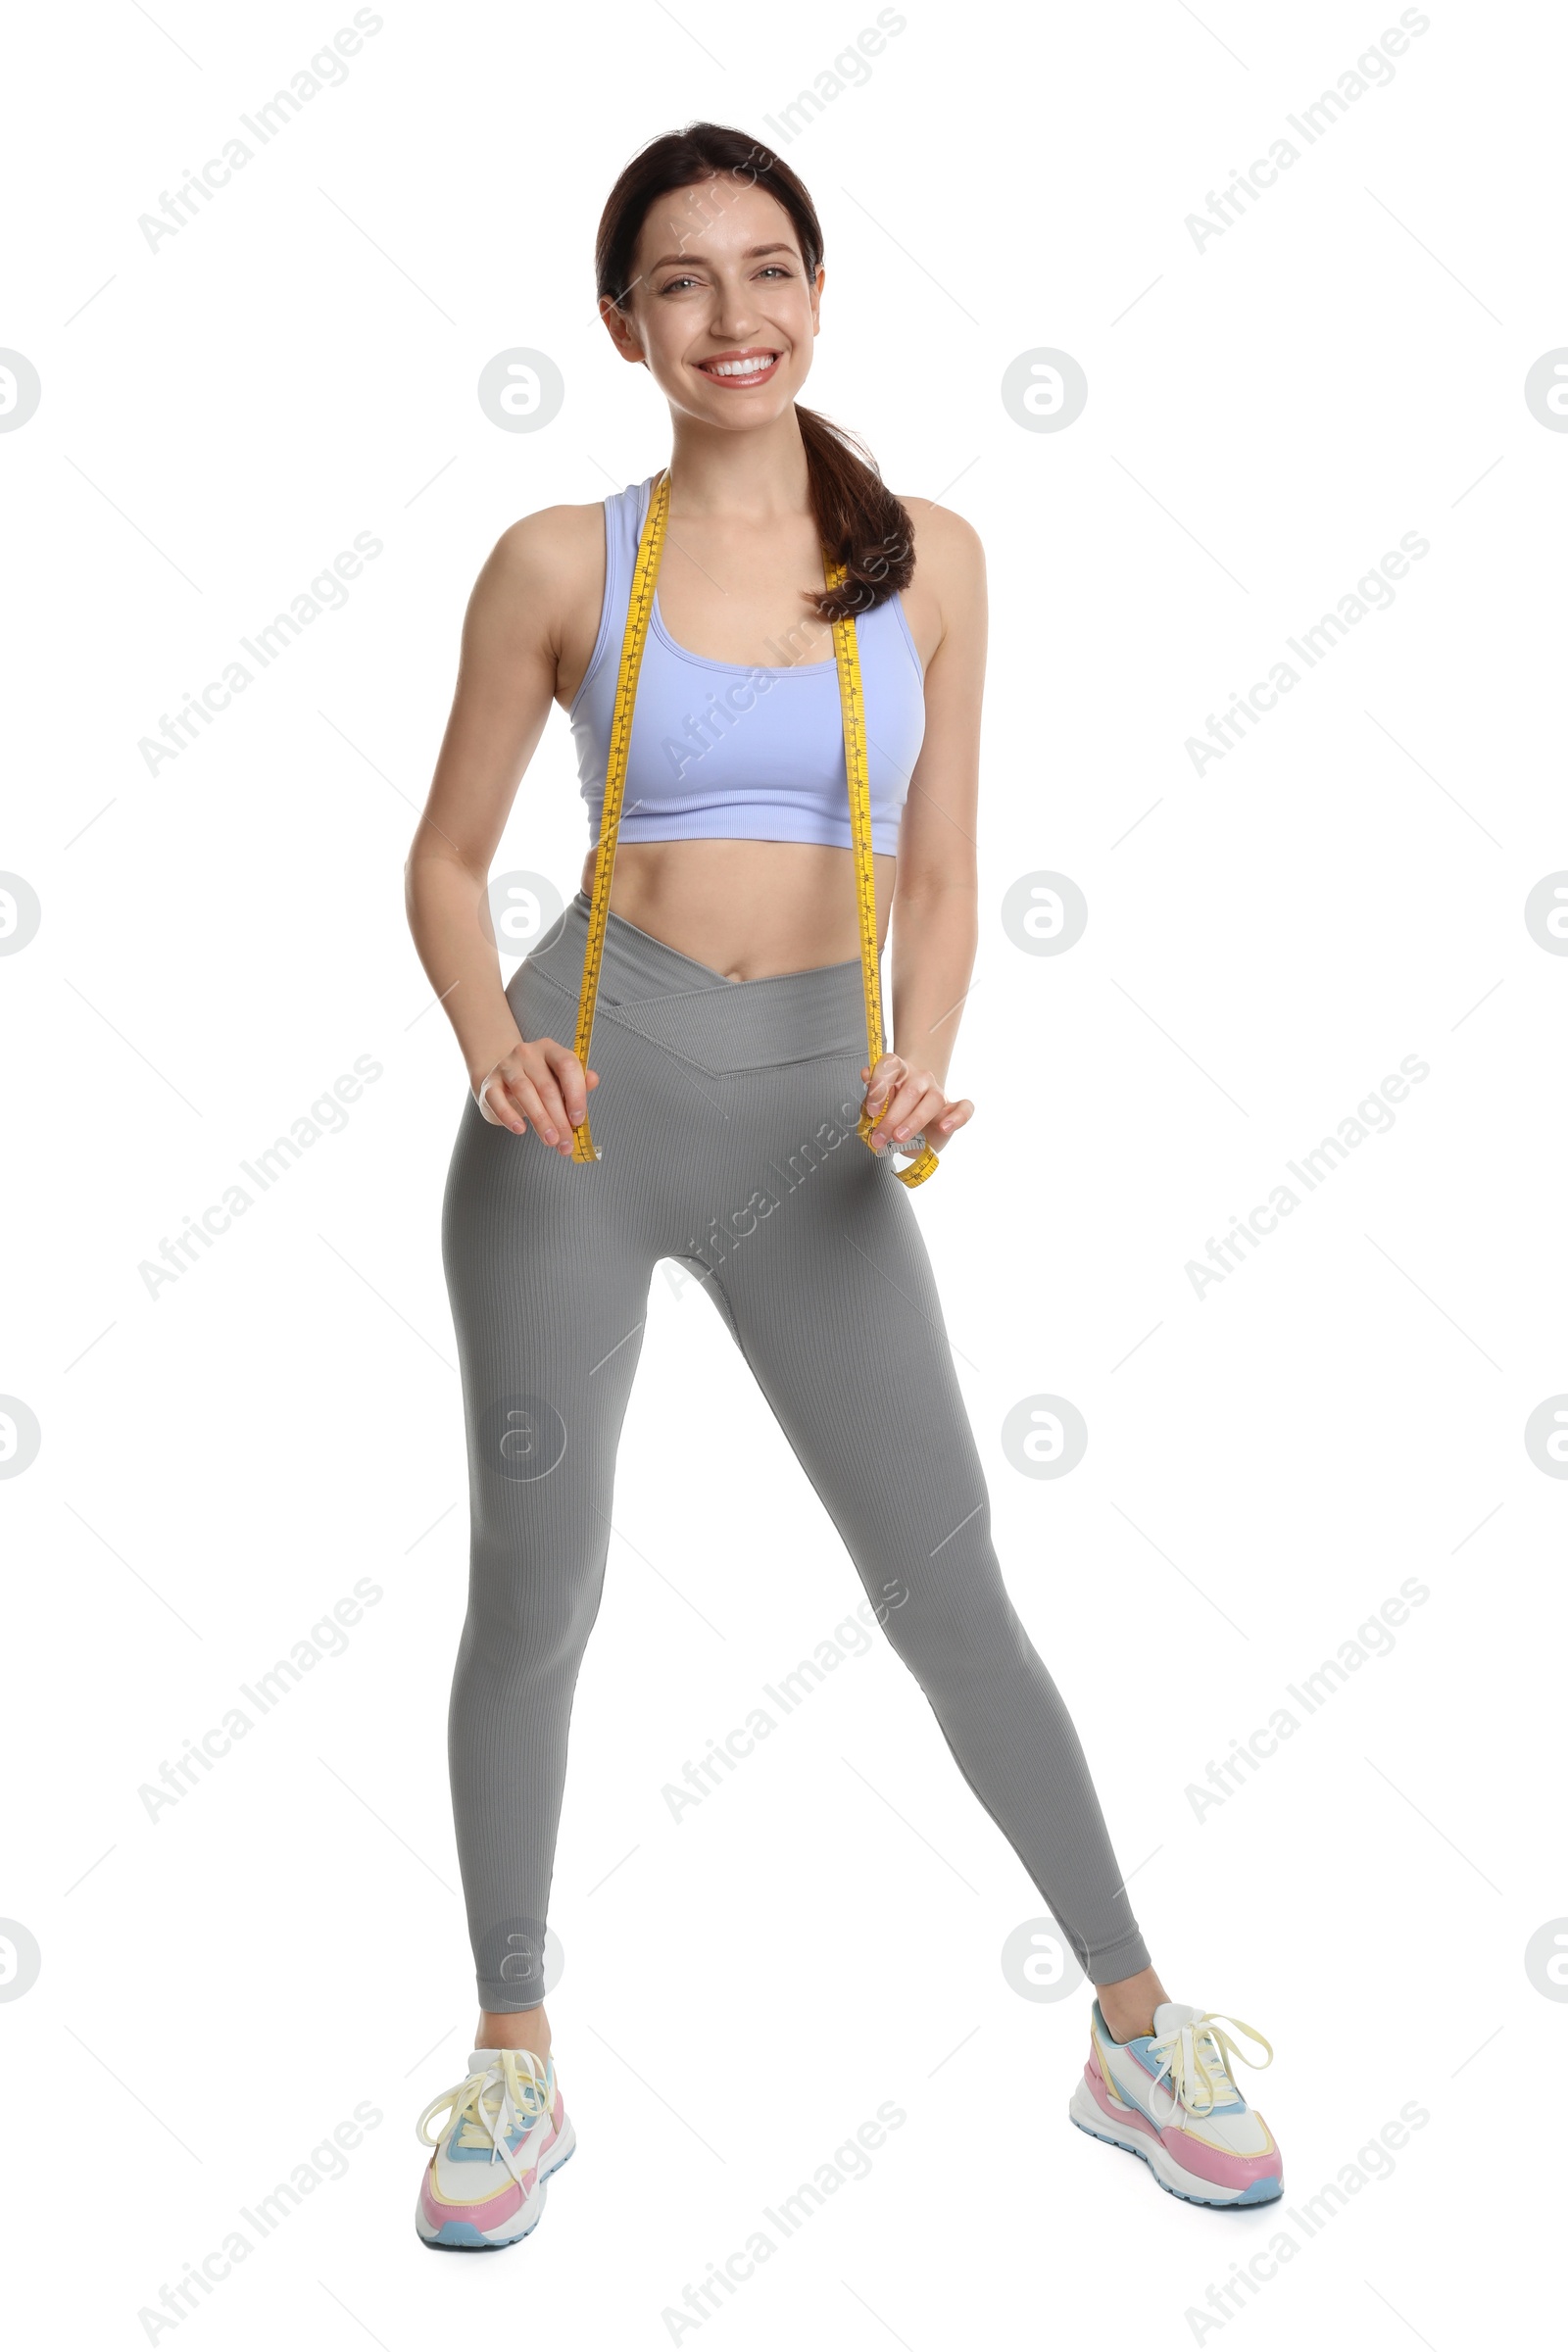 Photo of Happy young woman with measuring tape showing her slim body against white background